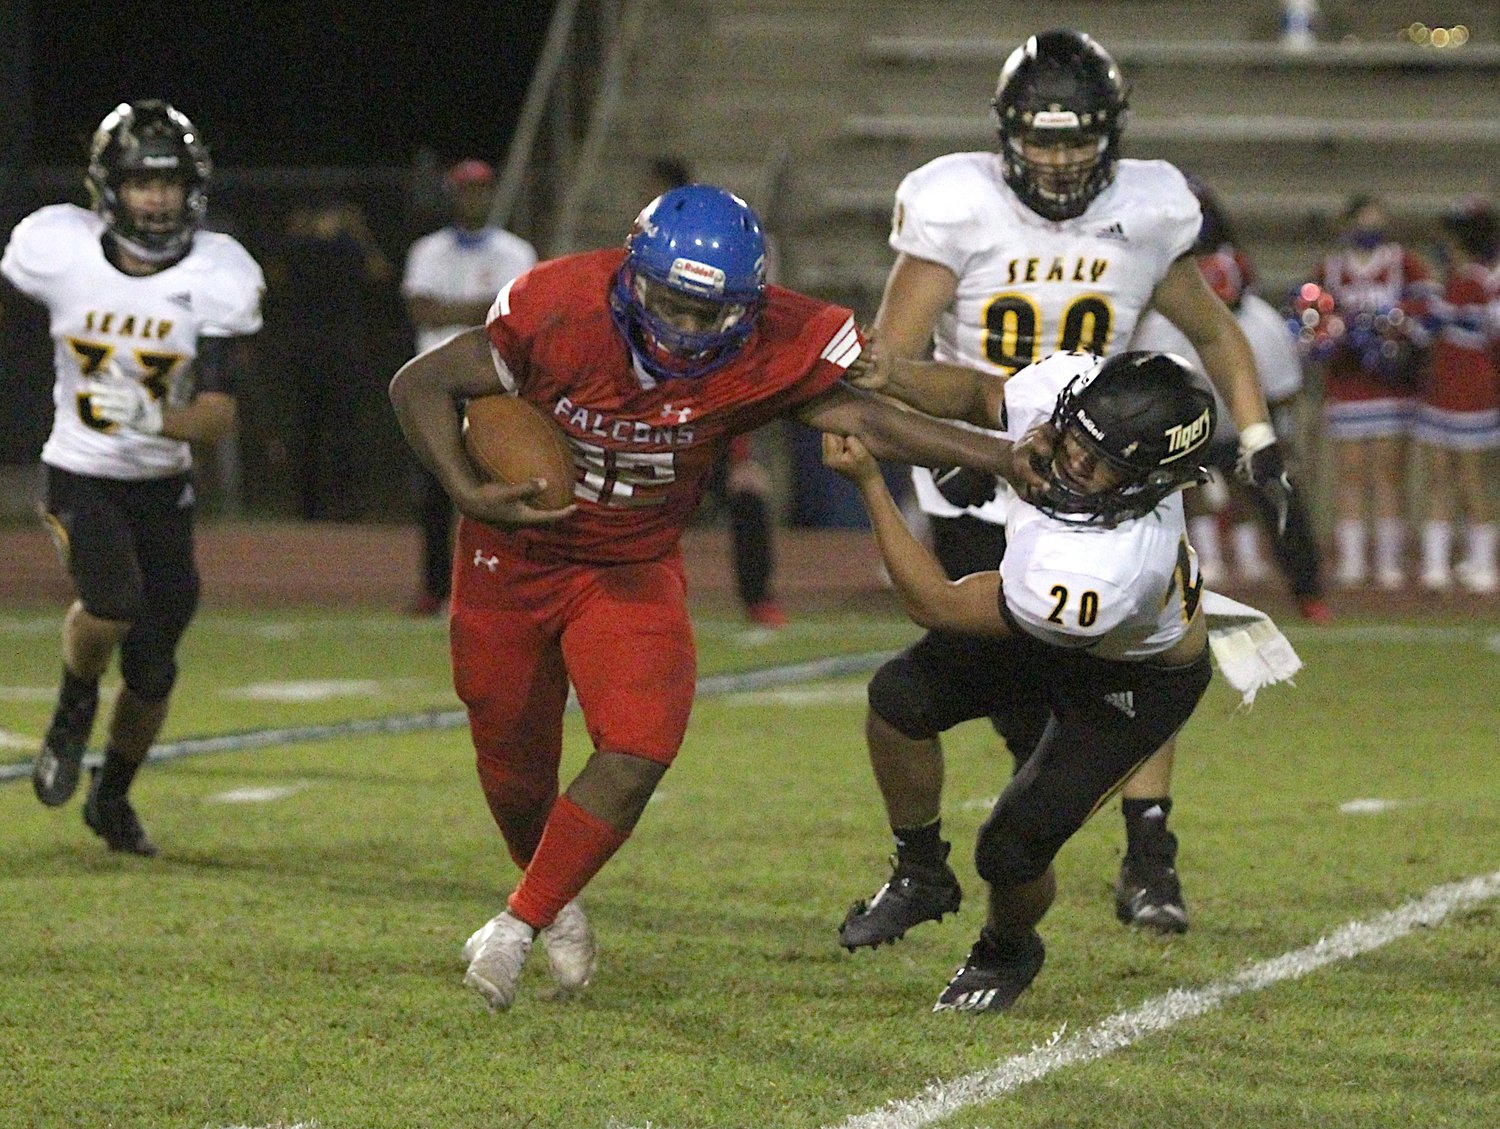 Falcon senior fullback Matthew Green delivers a stiff arm to Sealy senior linebacker Stevie Alvarez in the second half of the first game within District 12-4A-D2 this season in Brookshire on Oct. 9, 2020. The visiting Tigers won, 43-8.